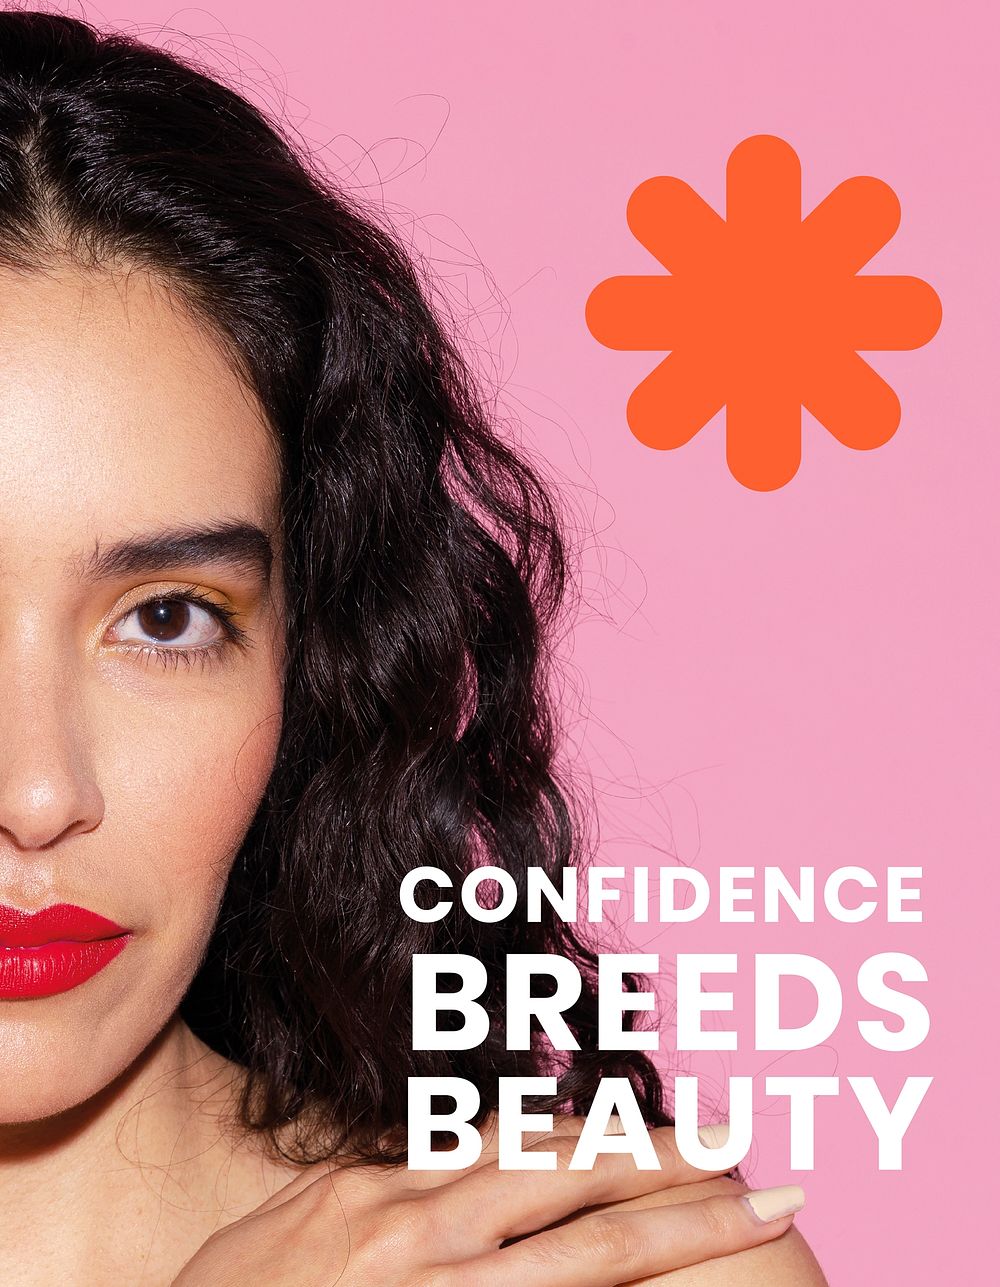 Confidence breeds beauty flyer template vector